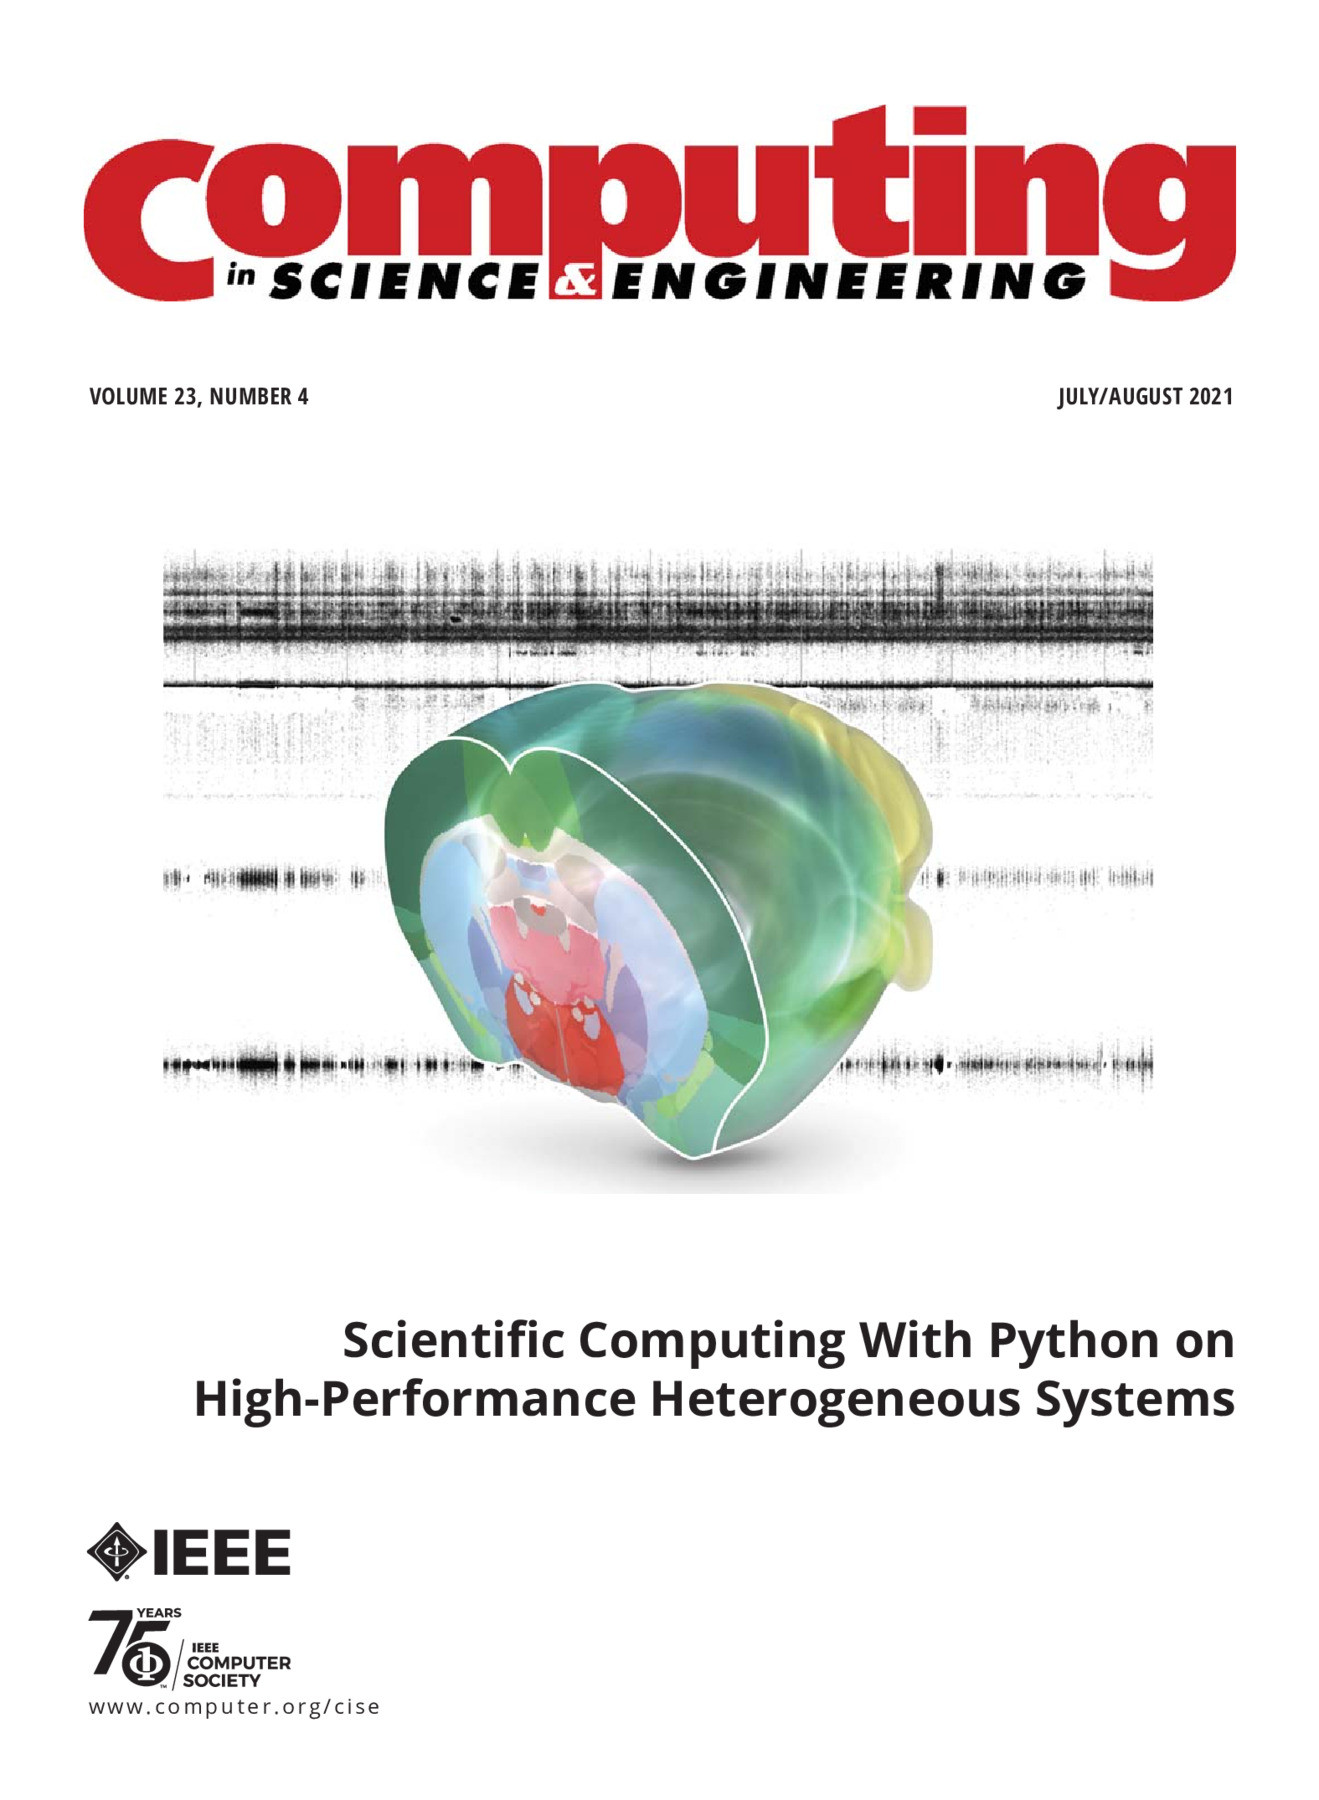 Computing in Science and Engineering July/August 2021 Vol. 23 No. 4